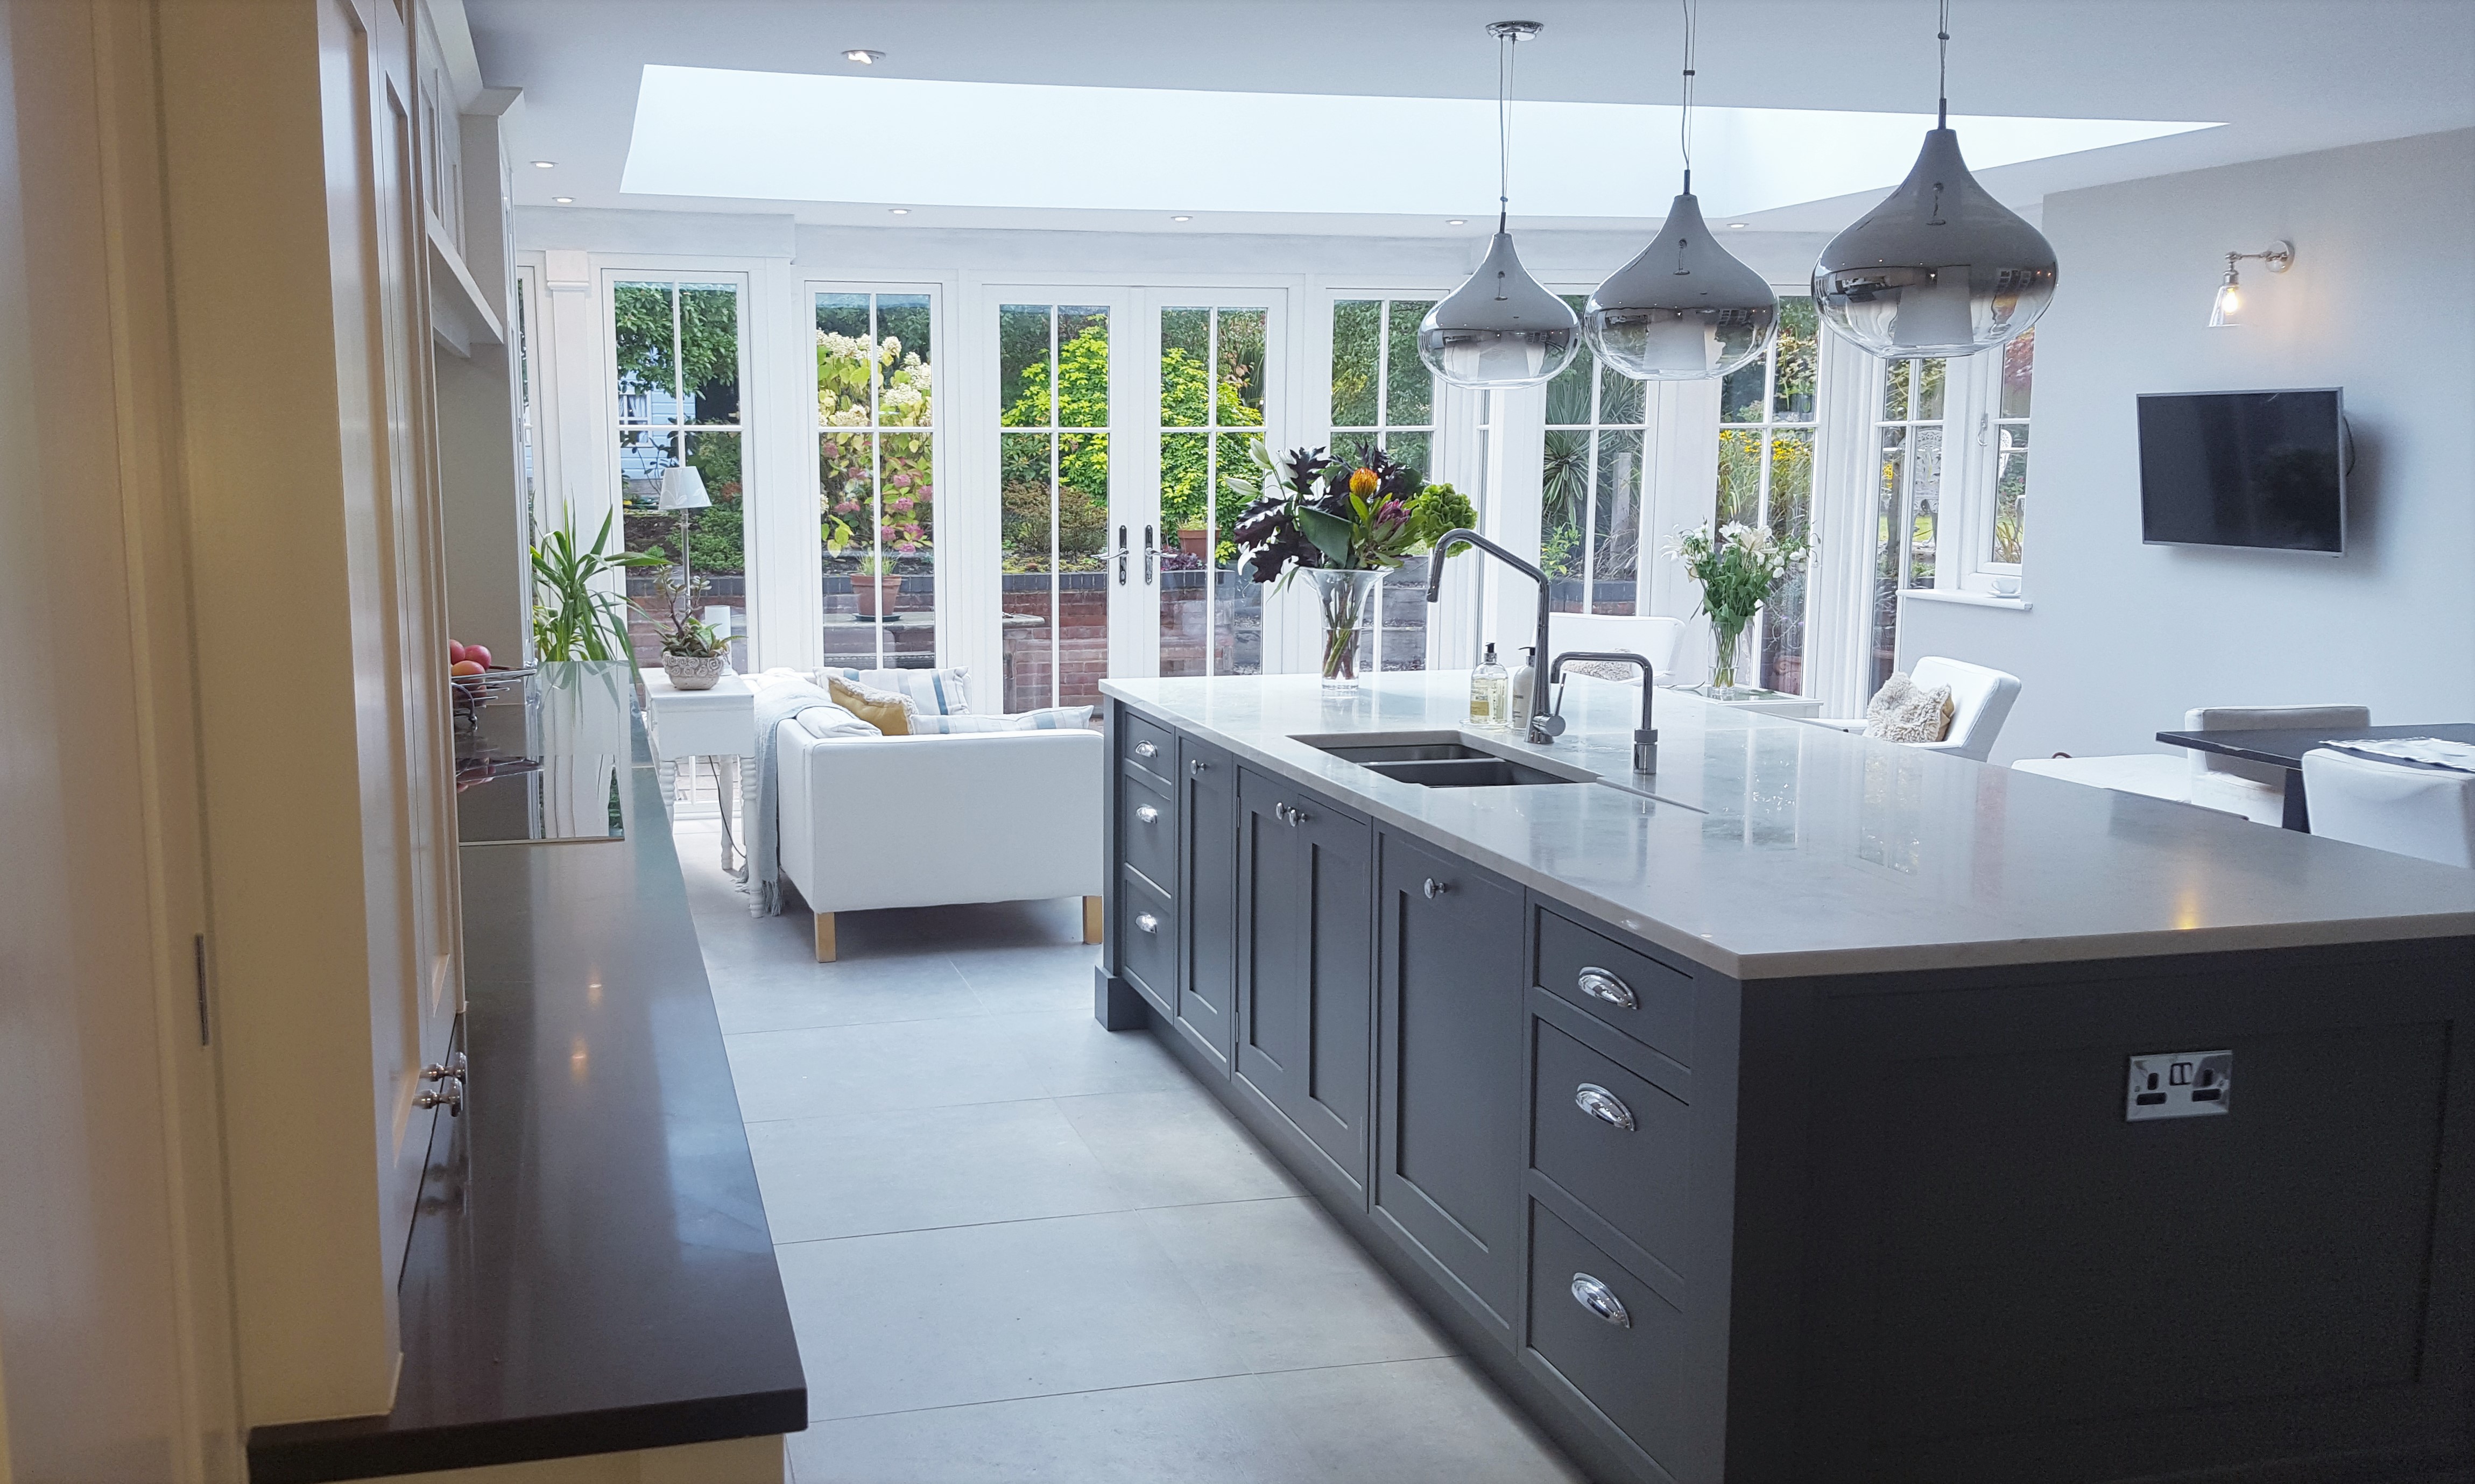 Beautiful Bespoke kitchens, made in Sheffield by expert cabinet makers.